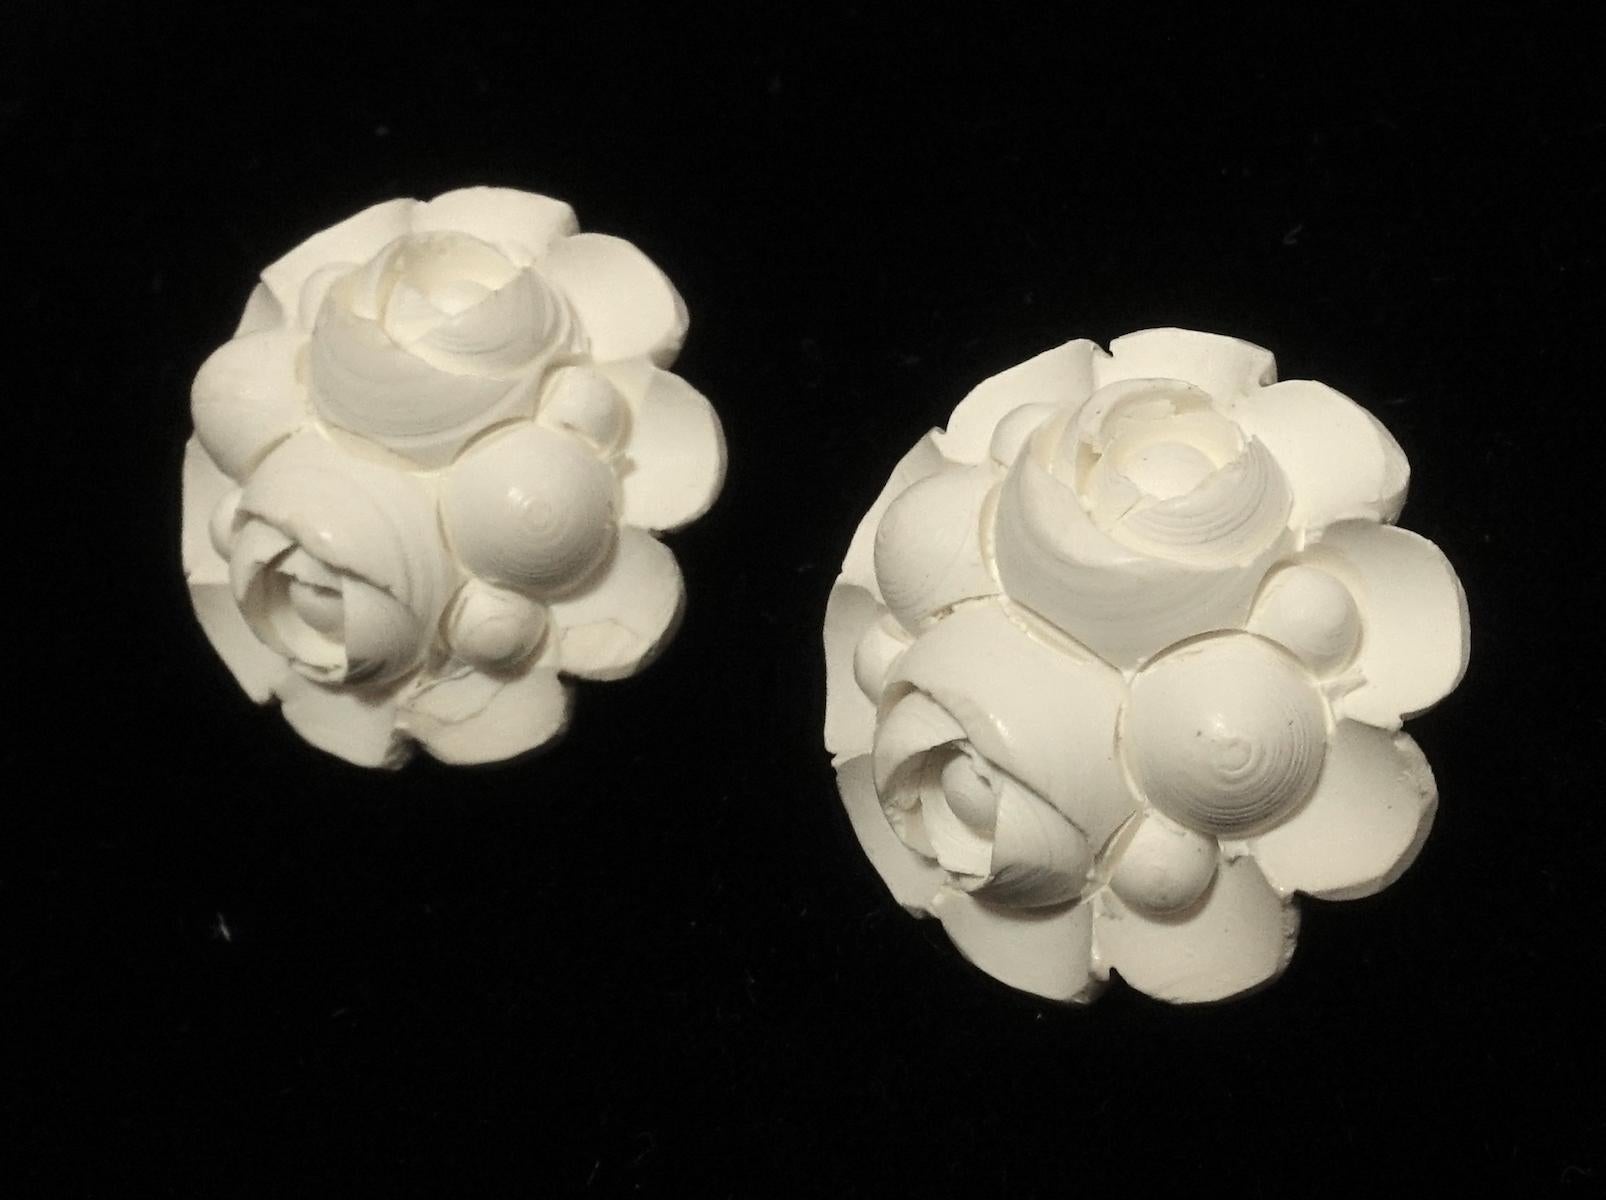 These vintage 1950s earrings feature a floral design in white resin in a gold tone setting.  These clip earrings measure 3/4” in diameter and are in excellent condition.